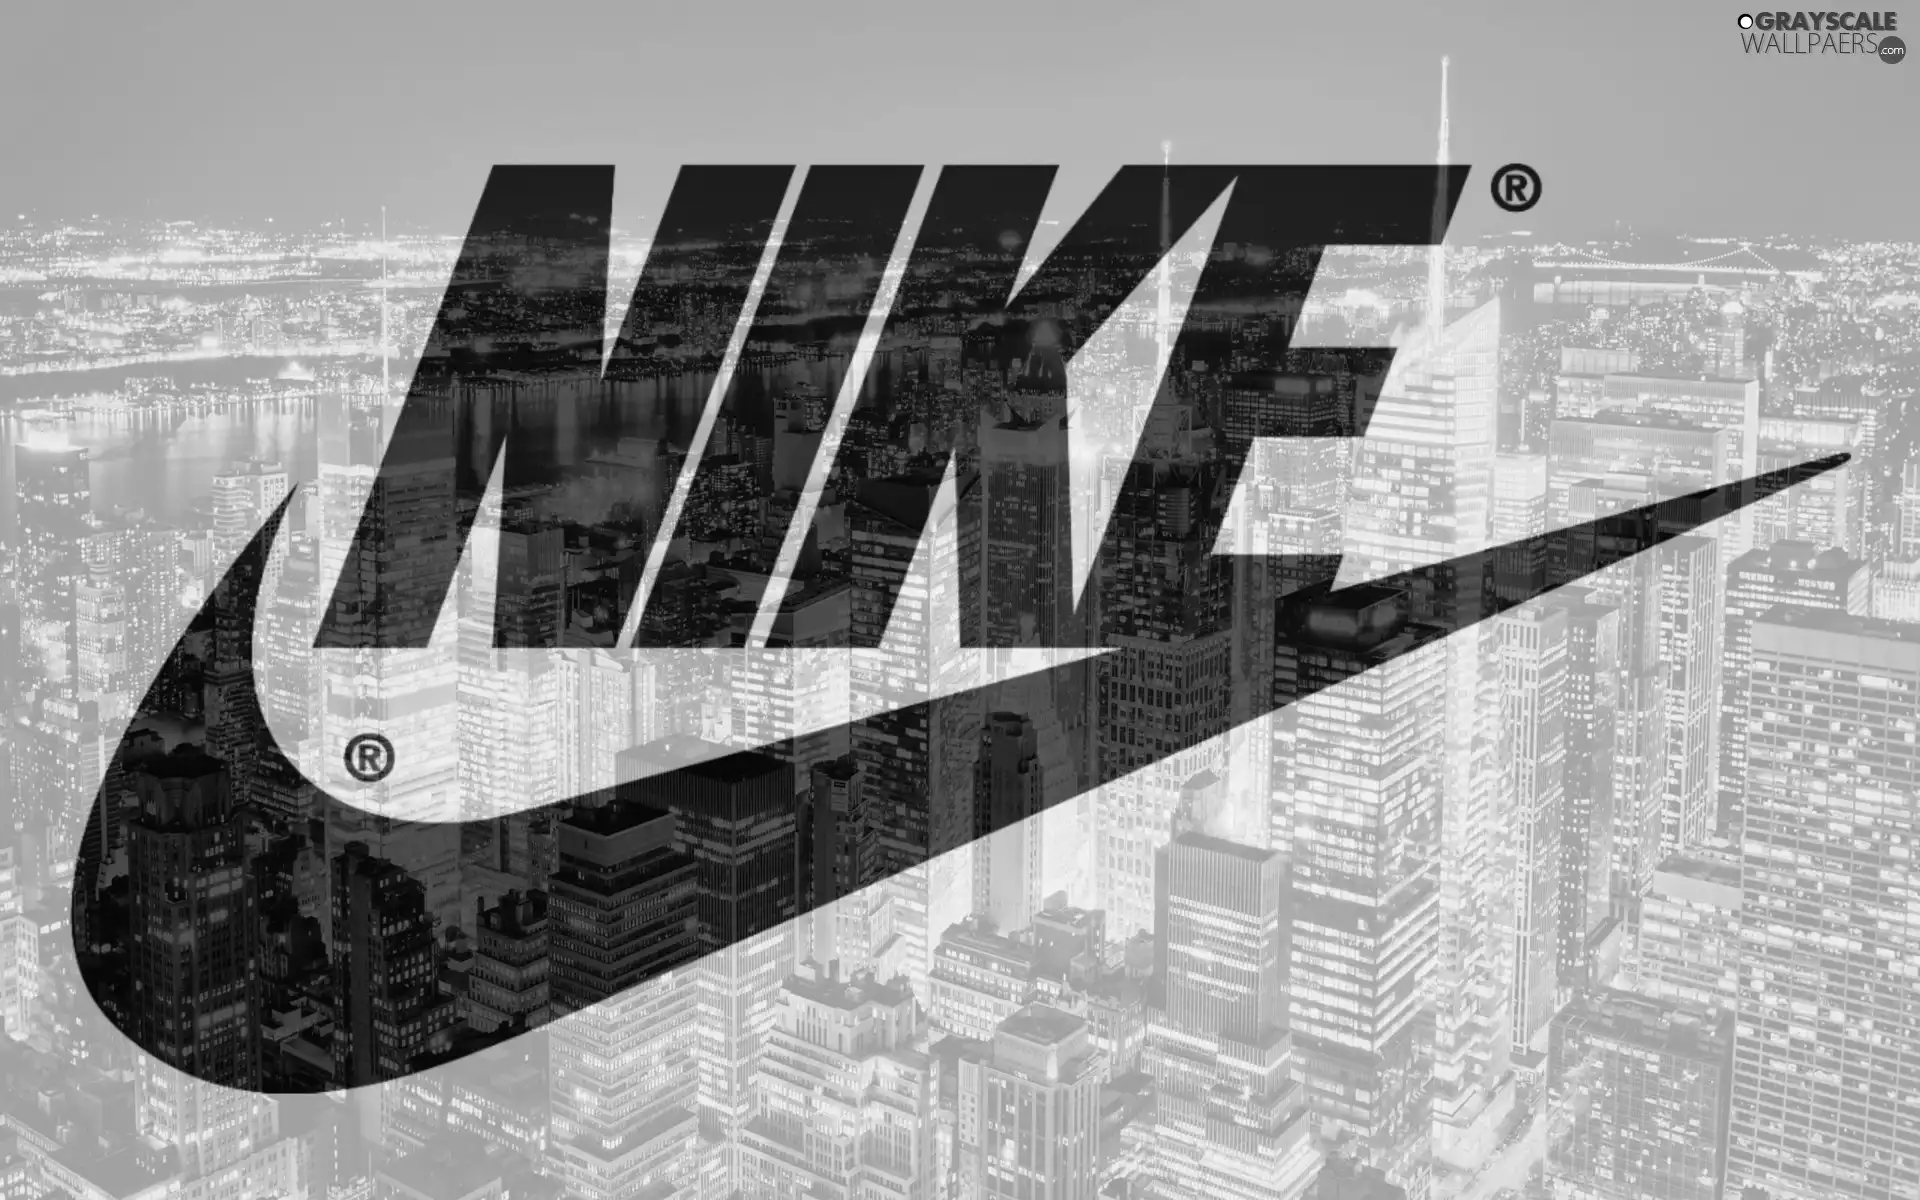 town, Nike, picture